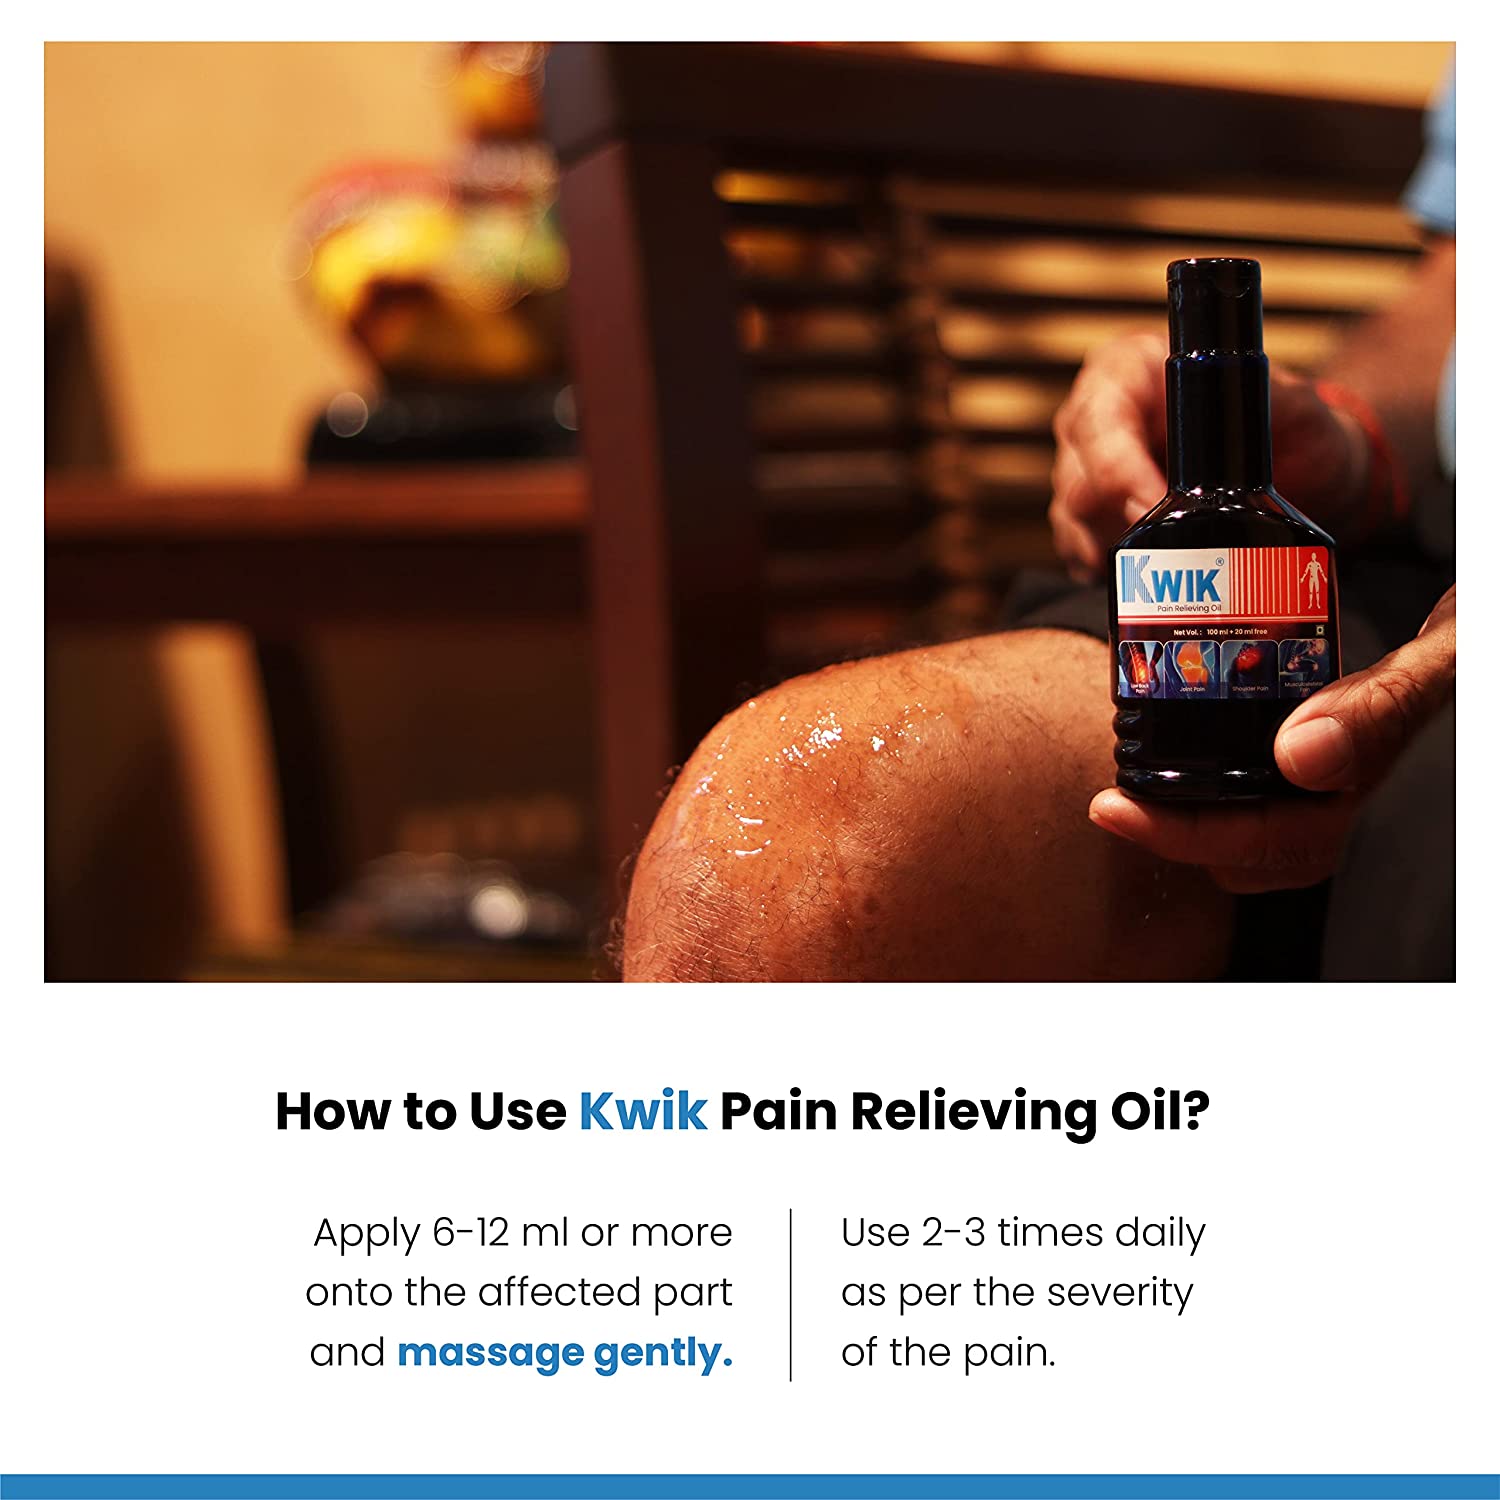 An image showing how to apply Kwik Pain Relieving Oil.